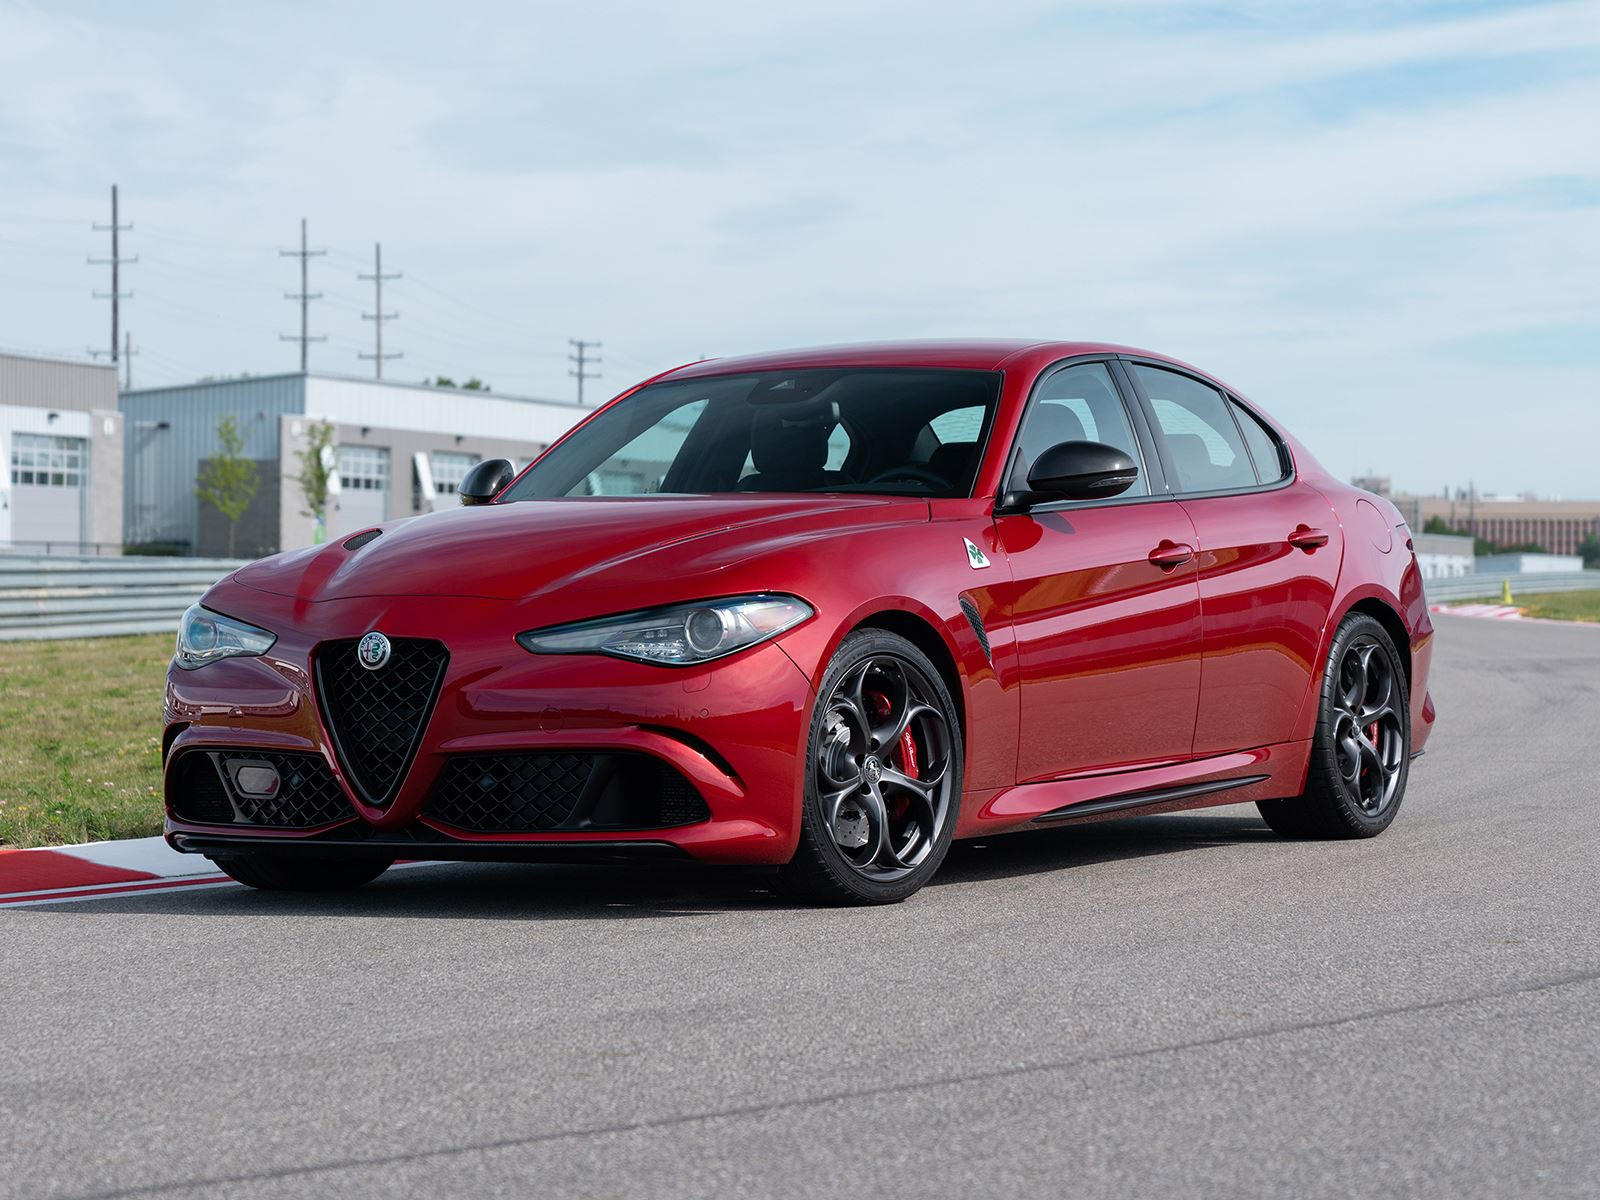 2019 Alfa Romeo Giulia Arrives With New Sporty Styling Packages | CarBuzz